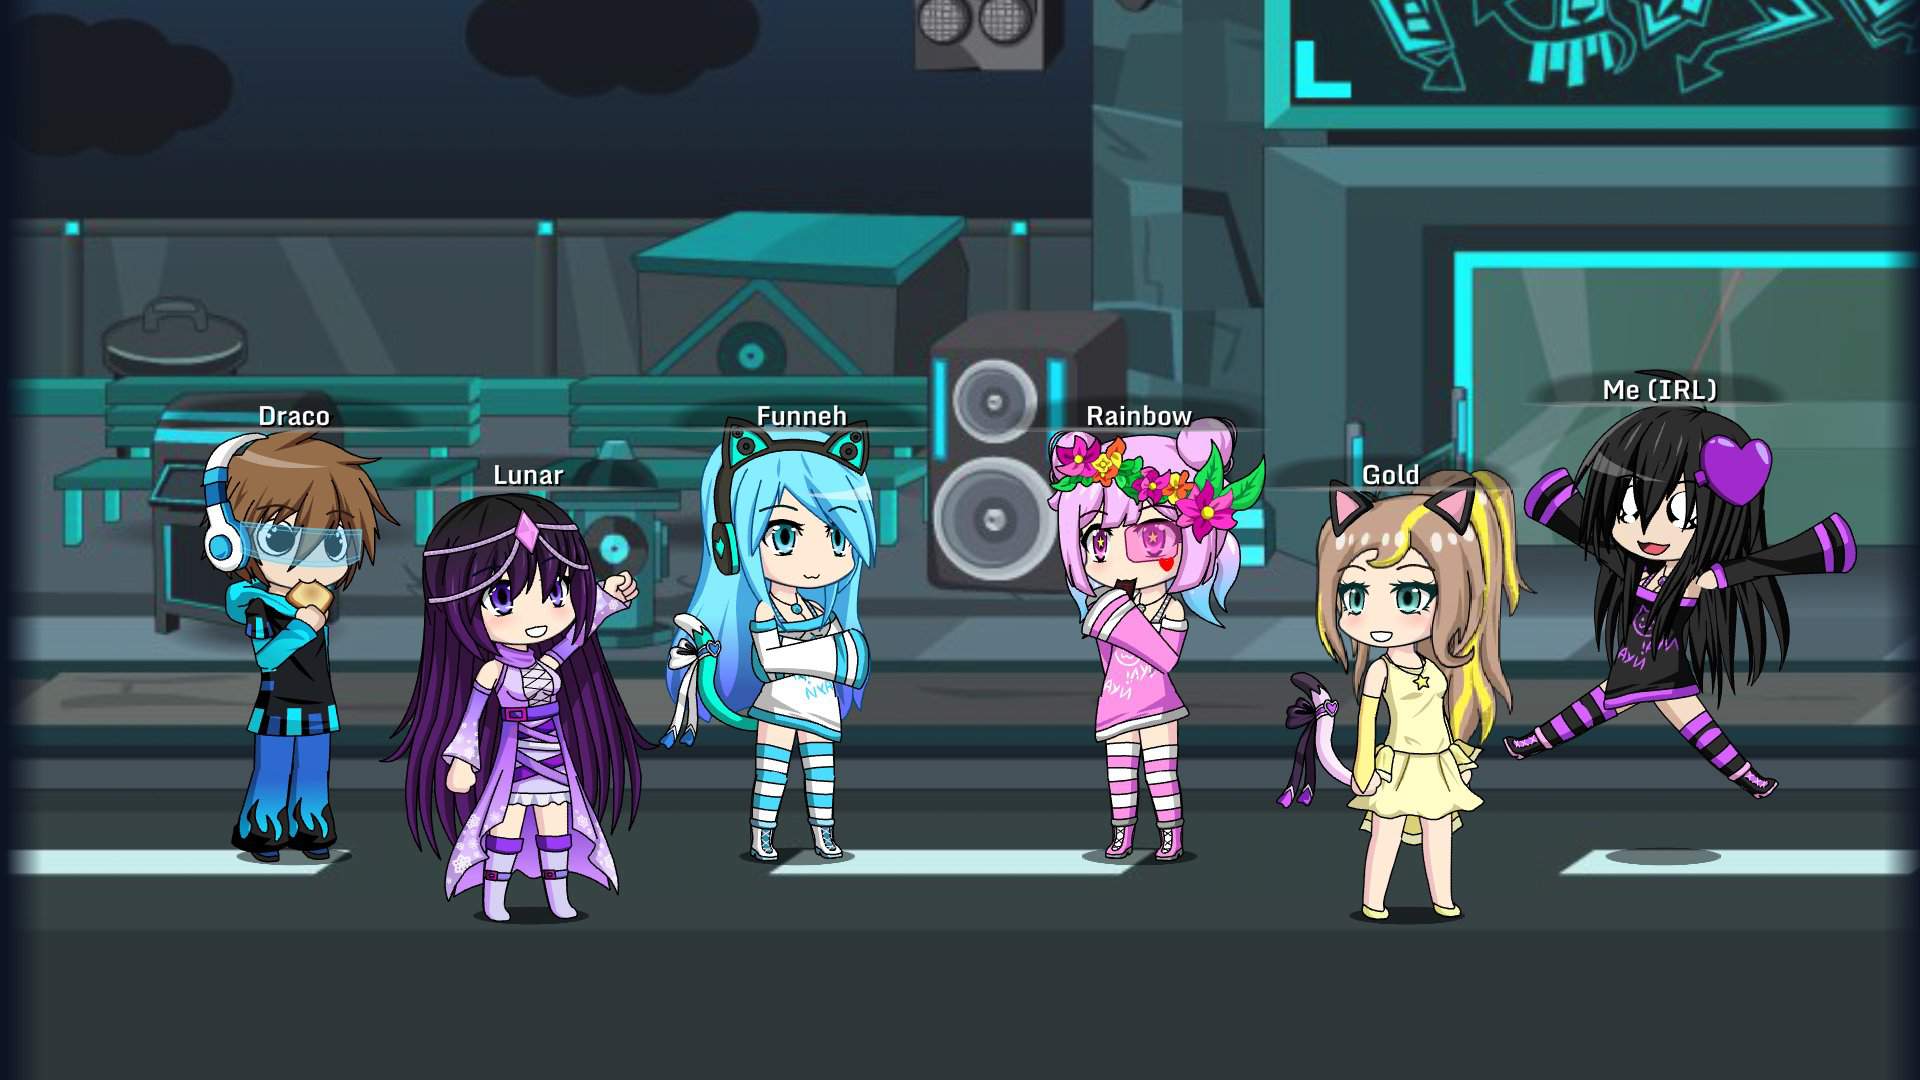 funneh and the crew